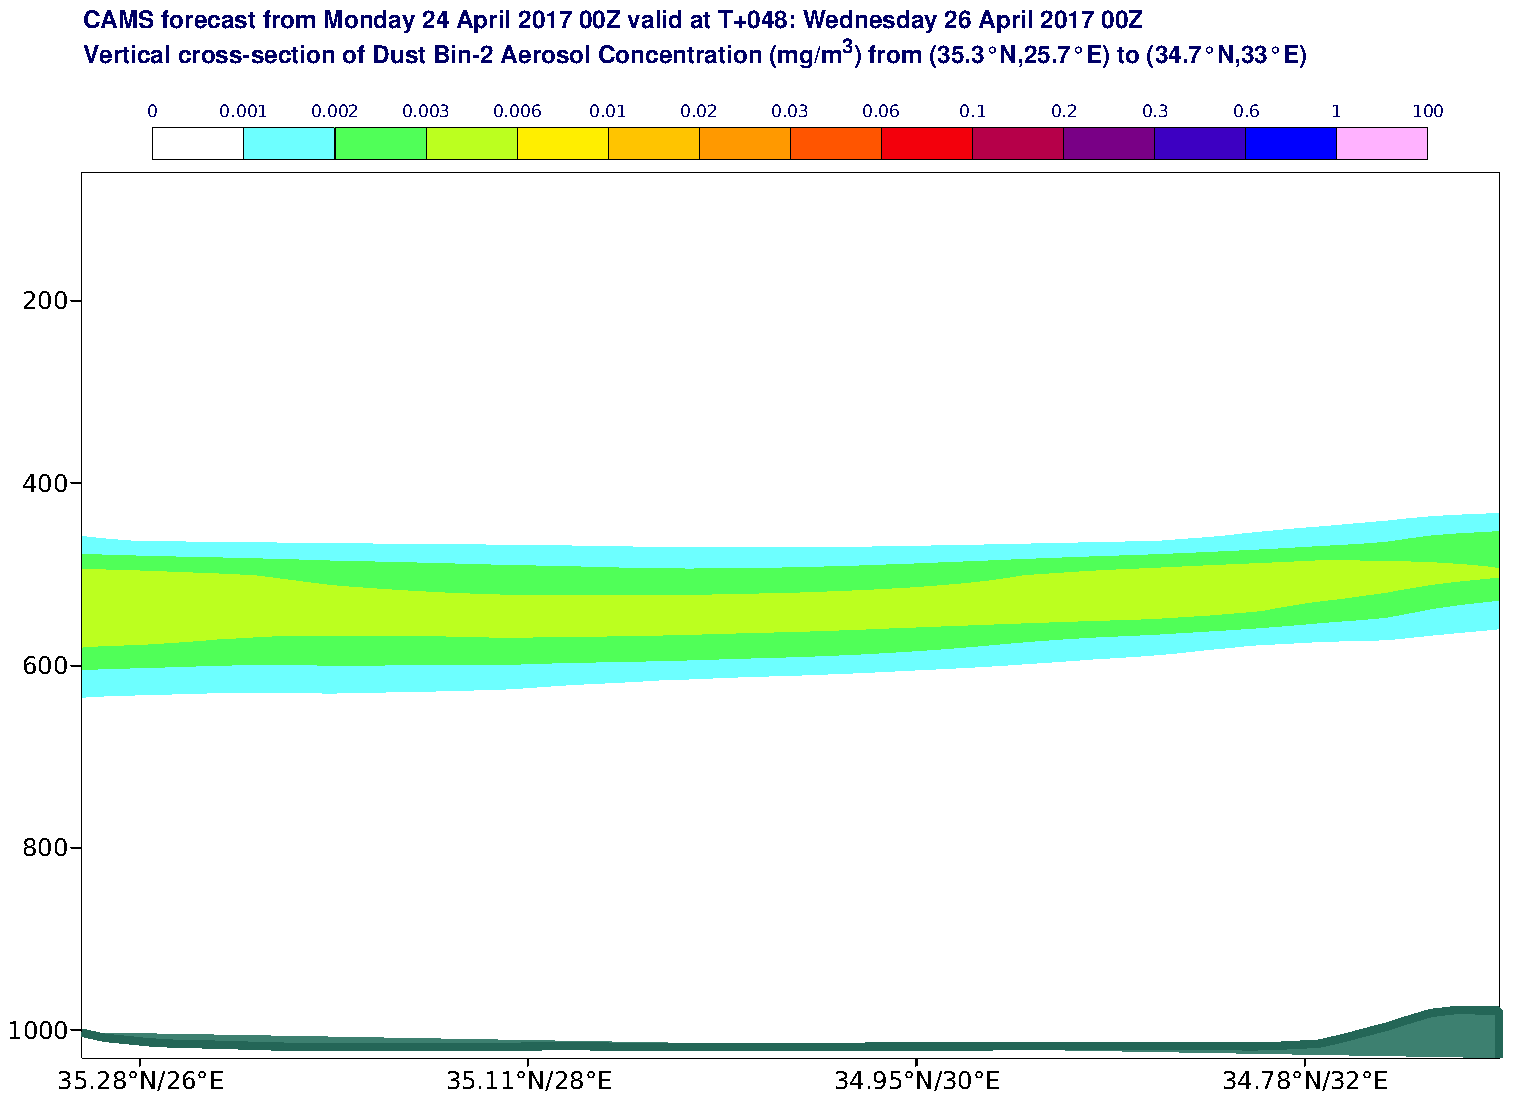 Vertical cross-section of Dust Bin-2 Aerosol Concentration (mg/m3) valid at T48 - 2017-04-26 00:00